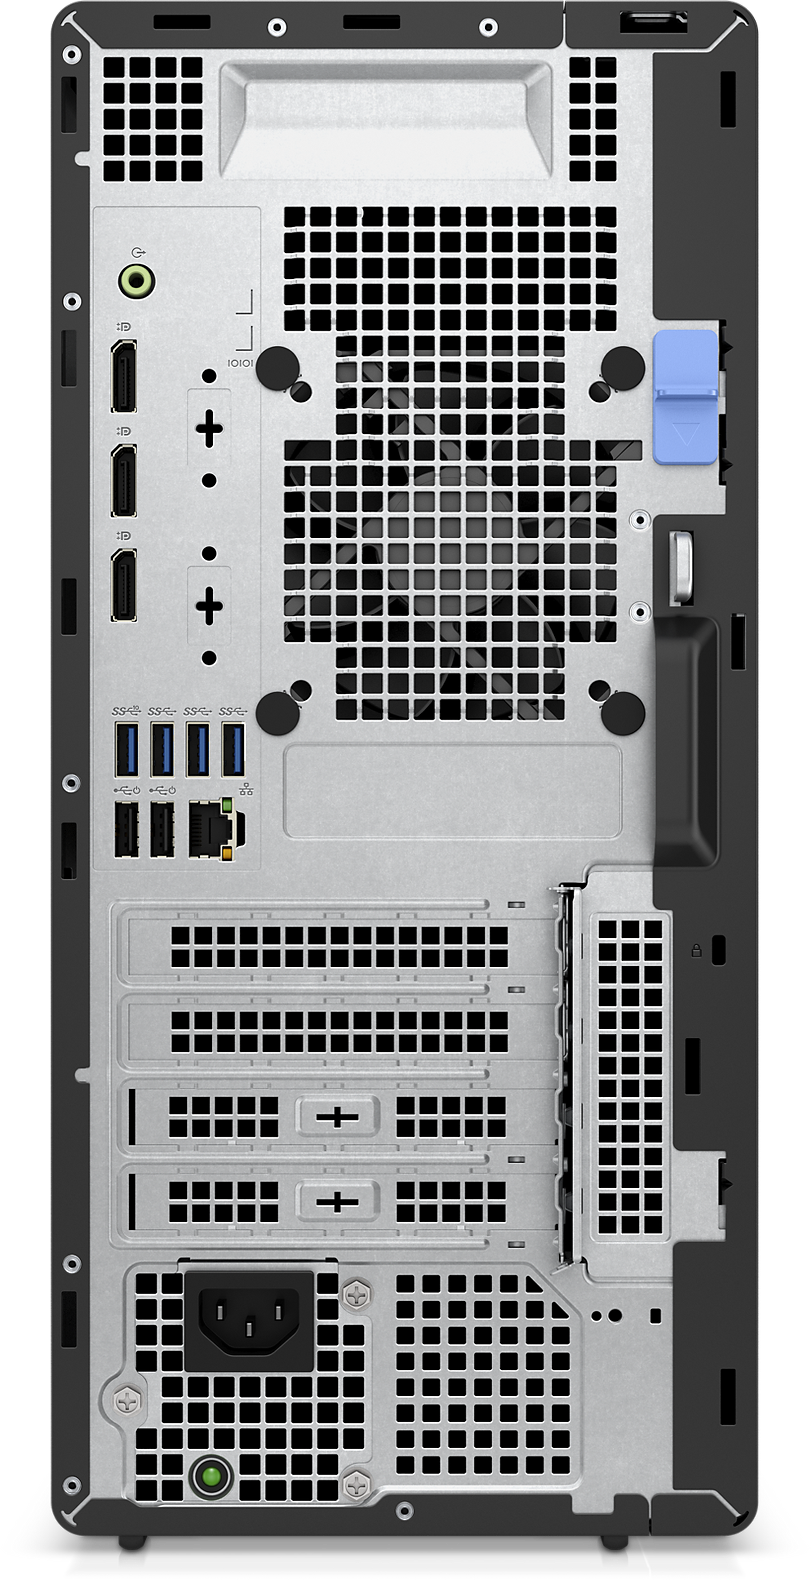 https://i.dell.com/is/image/DellContent/content/dam/ss2/products/desktops-and-all-in-ones/optiplex/7000-tsff/media-gallery/optiplex-7000t-gallery-2.psd?wid=1920&hei=1580&fmt=png-alpha&qlt=90%2c0&op_usm=1.75%2c0.3%2c2%2c0&resMode=sharp&pscan=auto&fit=constrain%2c1&align=0%2c0